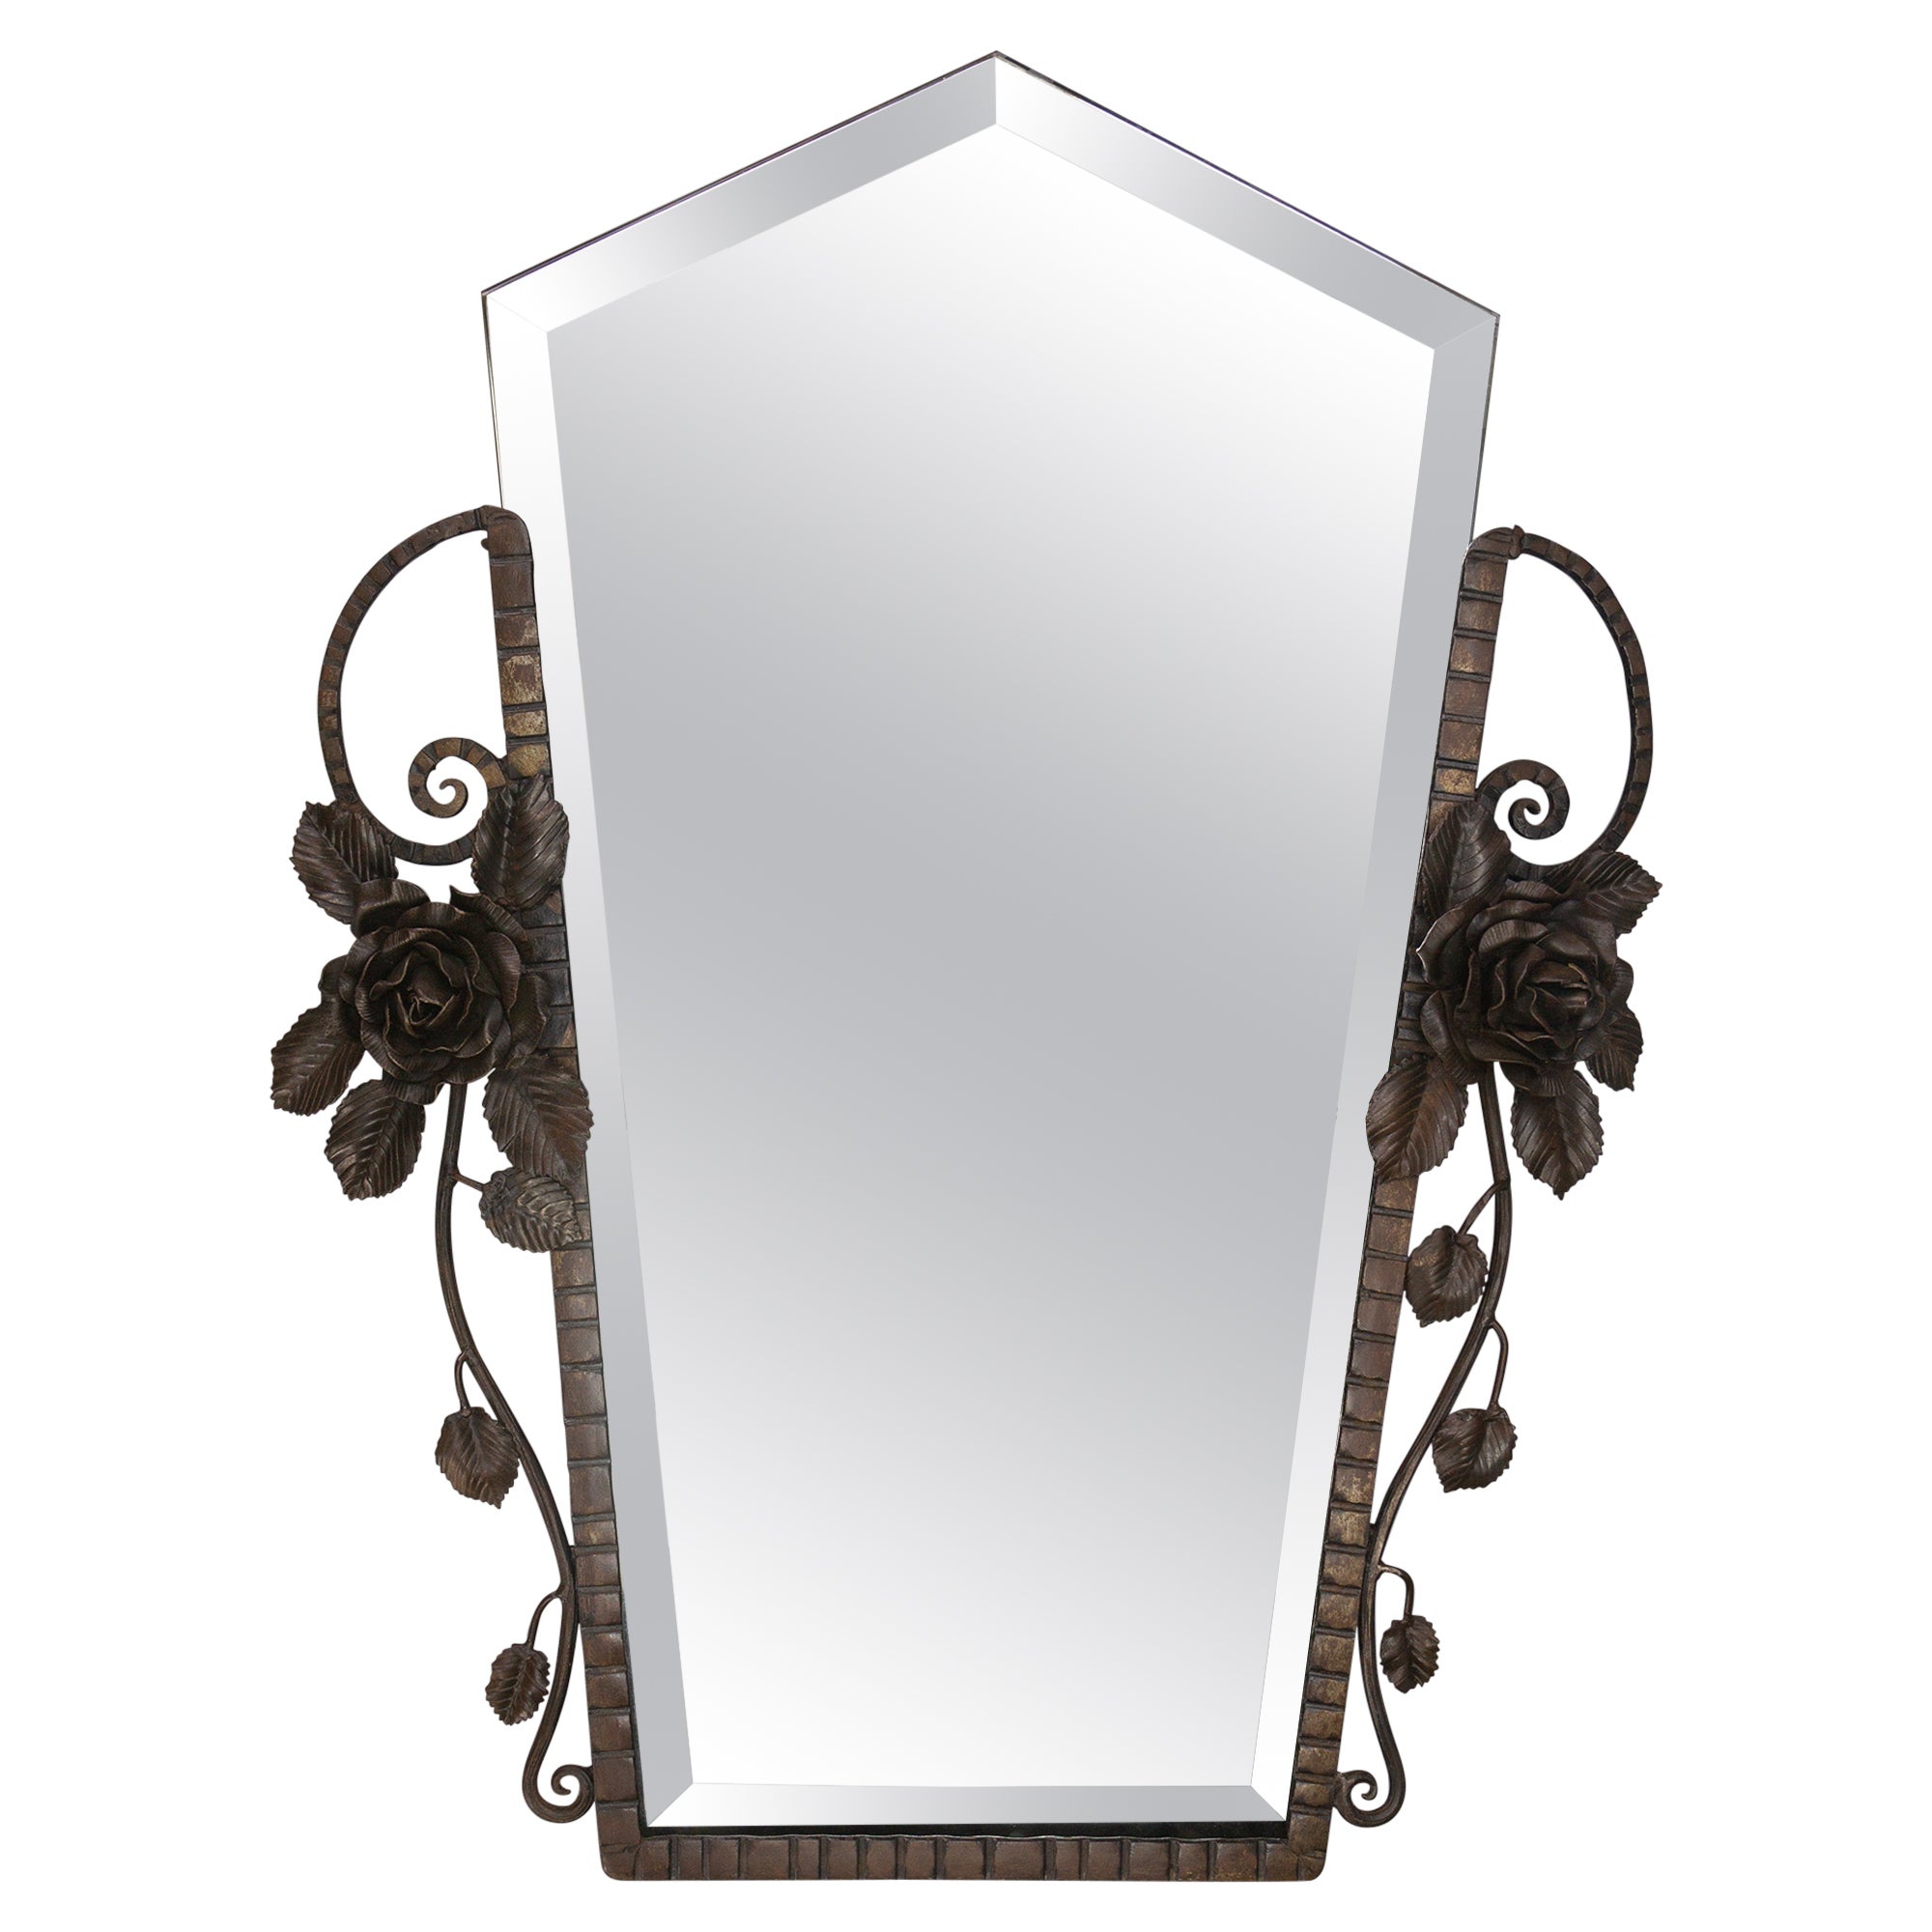 French Art Deco Beveled Wall Mirror with Wrought Iron Frame Roses, 1930s For Sale